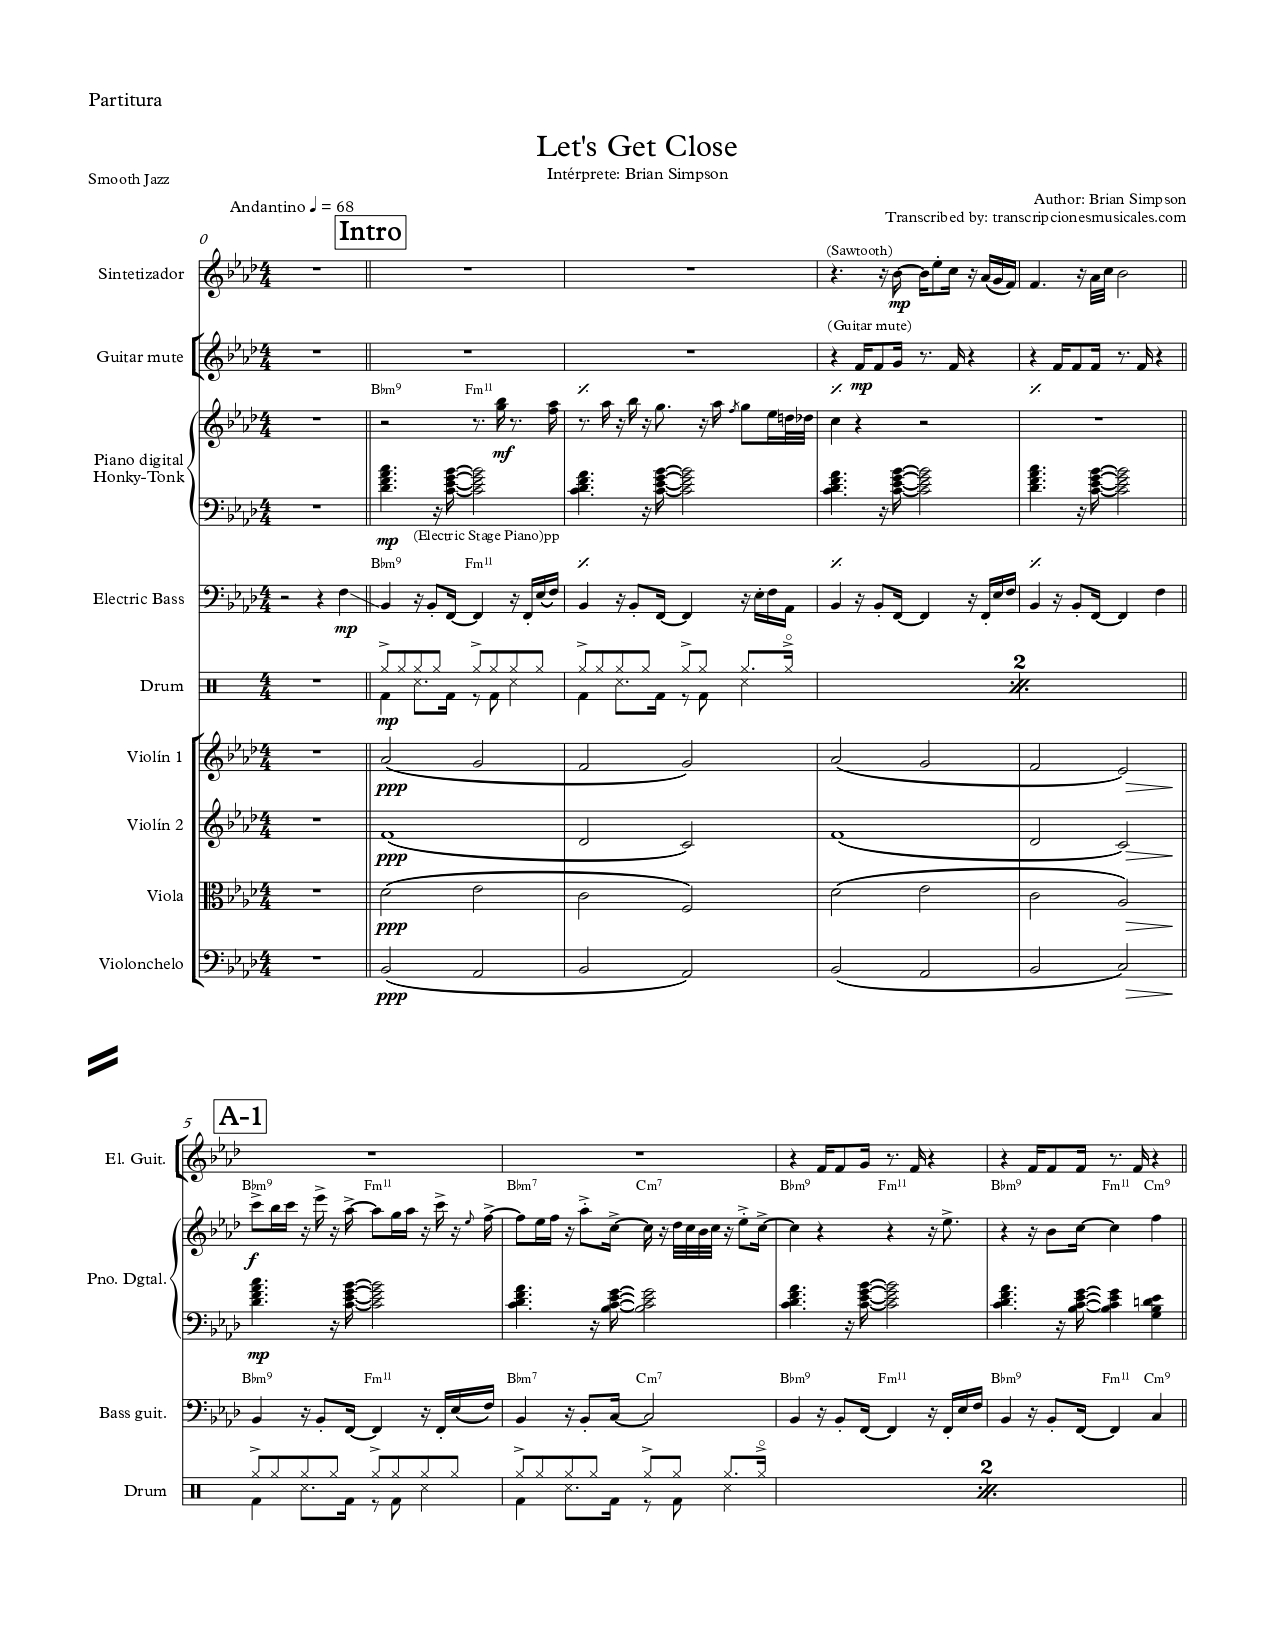 Let`s get close - sheet music page 1